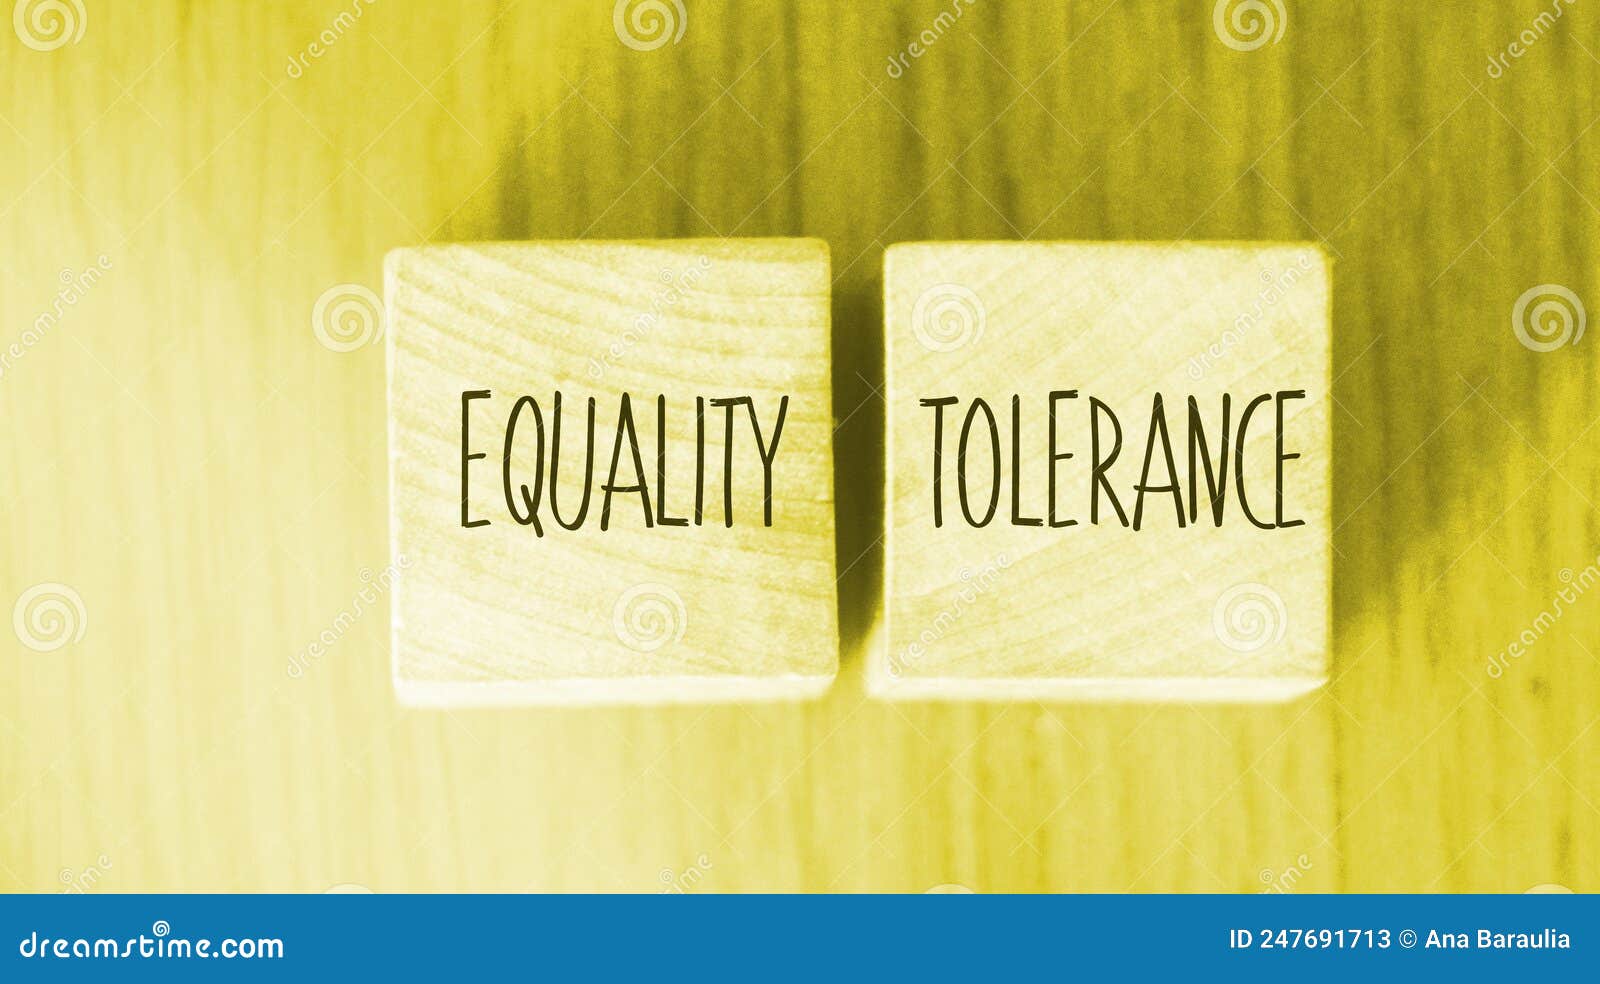 equality tolerance words written on wood blocks. equal rights inclusion social and business concept